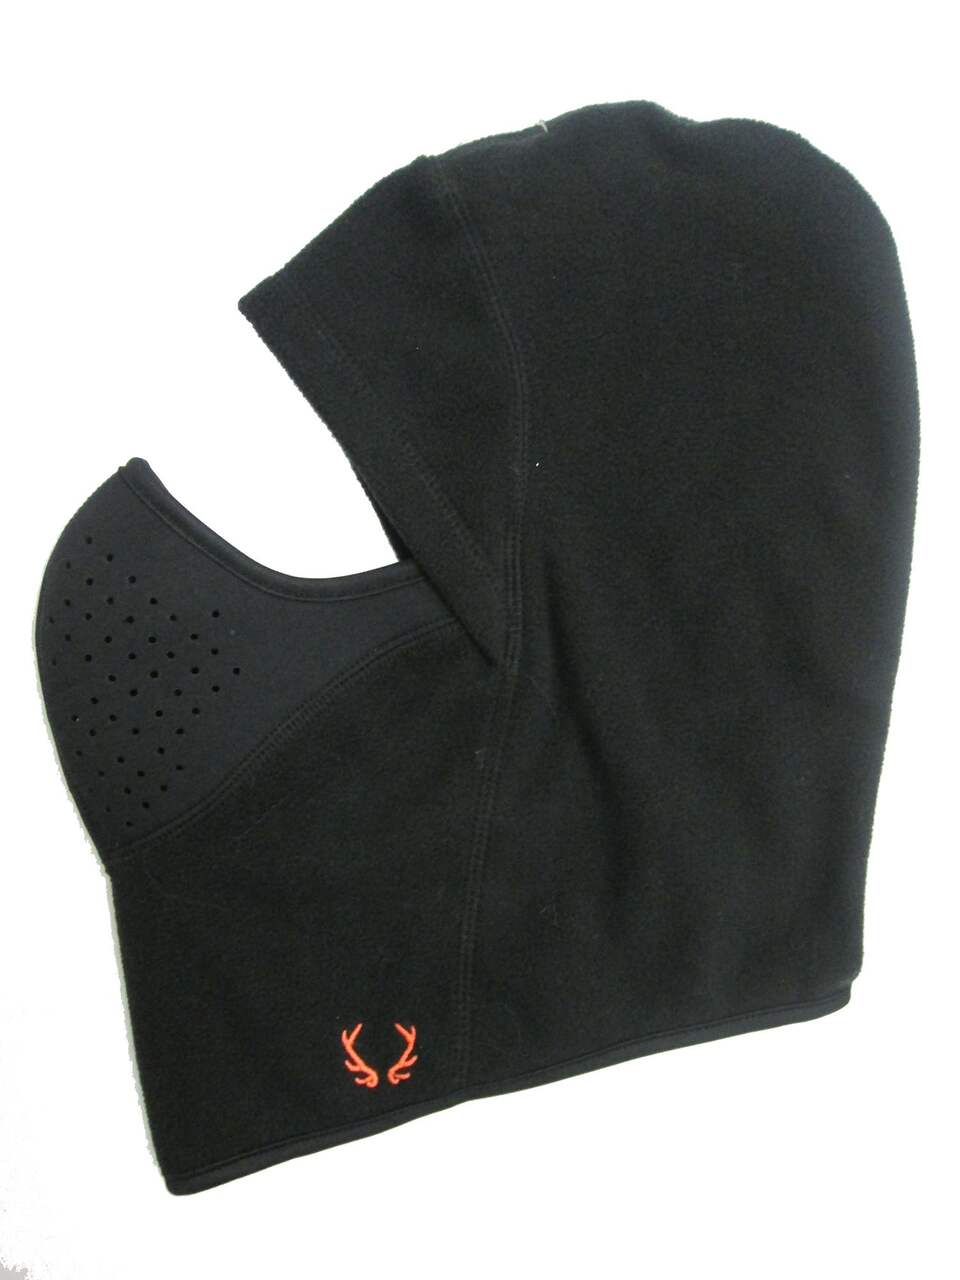 Yukon Gear HG Warm Fleece Balaclava/Hat with Facemask for Full Face  Protection, Black